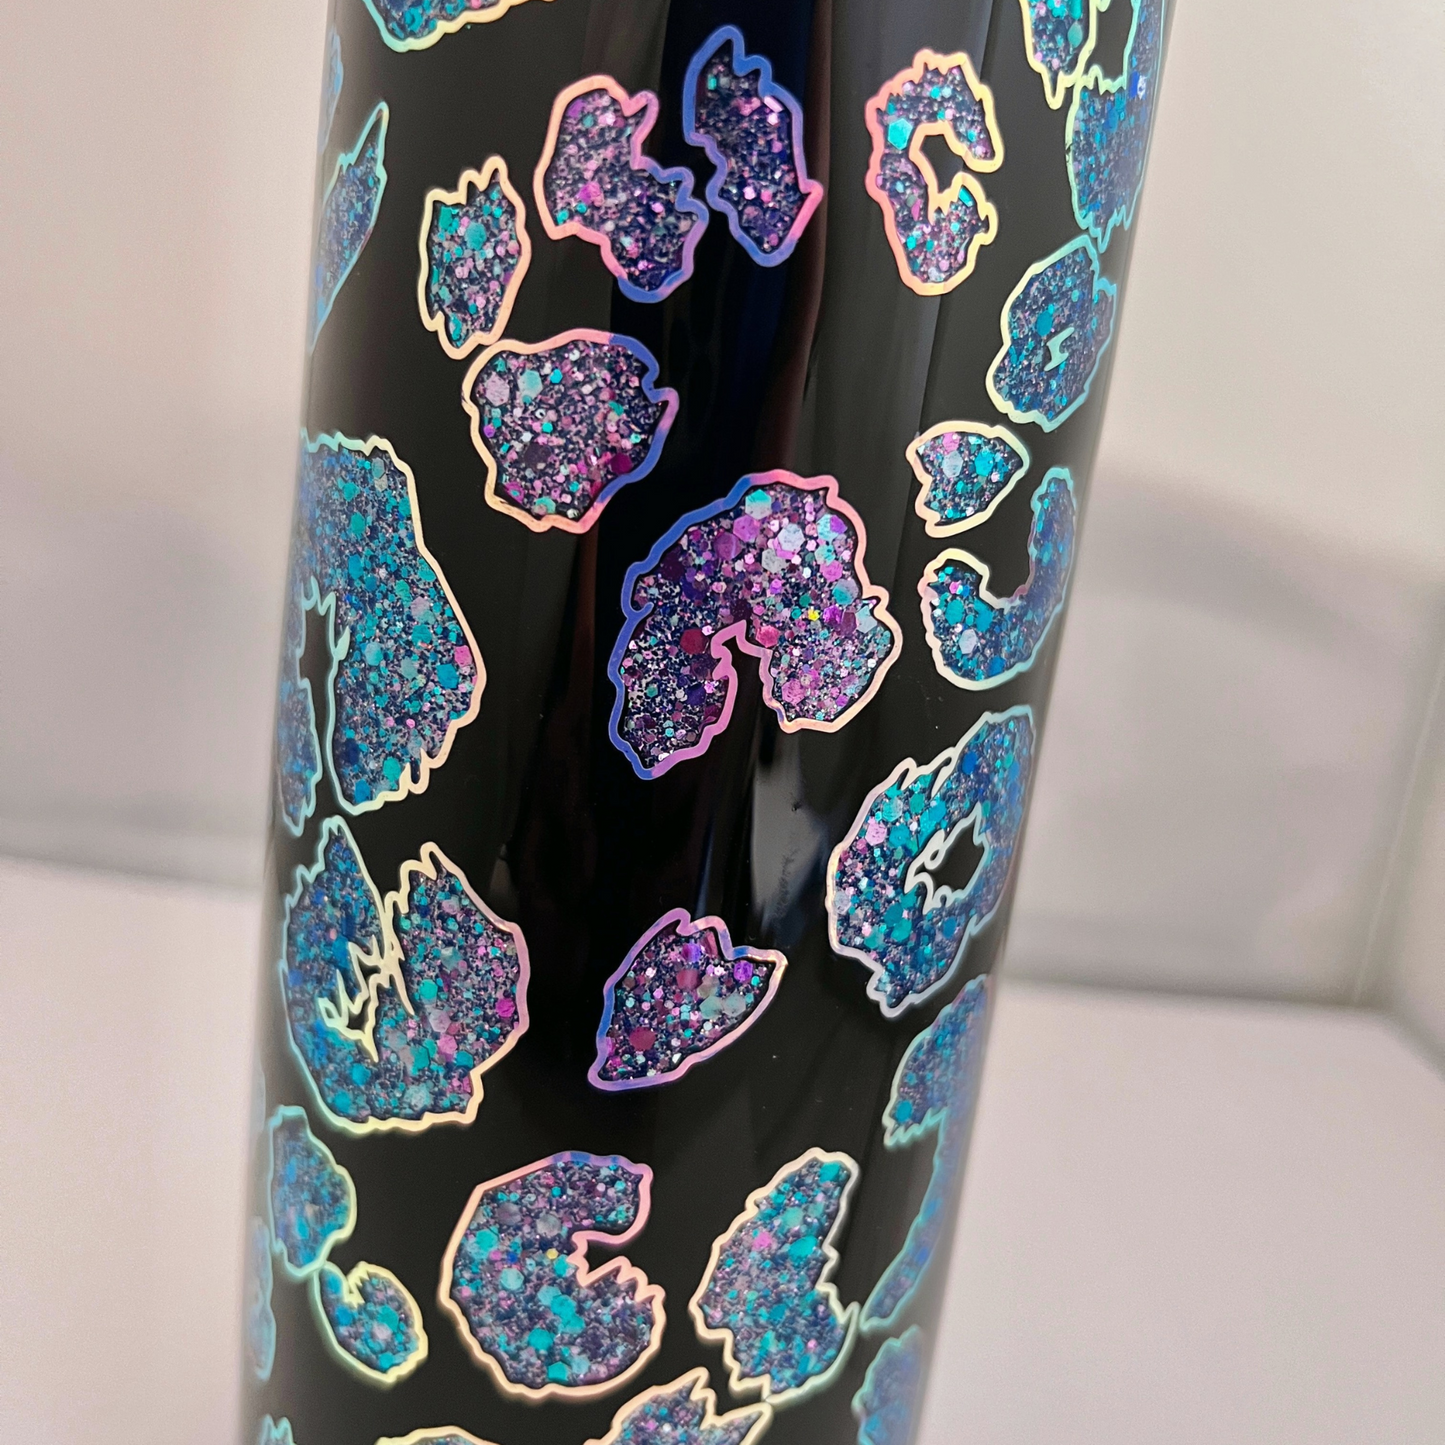 30oz Mama Tumbler with Cheetah Peek-A-Boo Purples and Blue Glitter, Stainless Steel Tumbler  - by Cristina